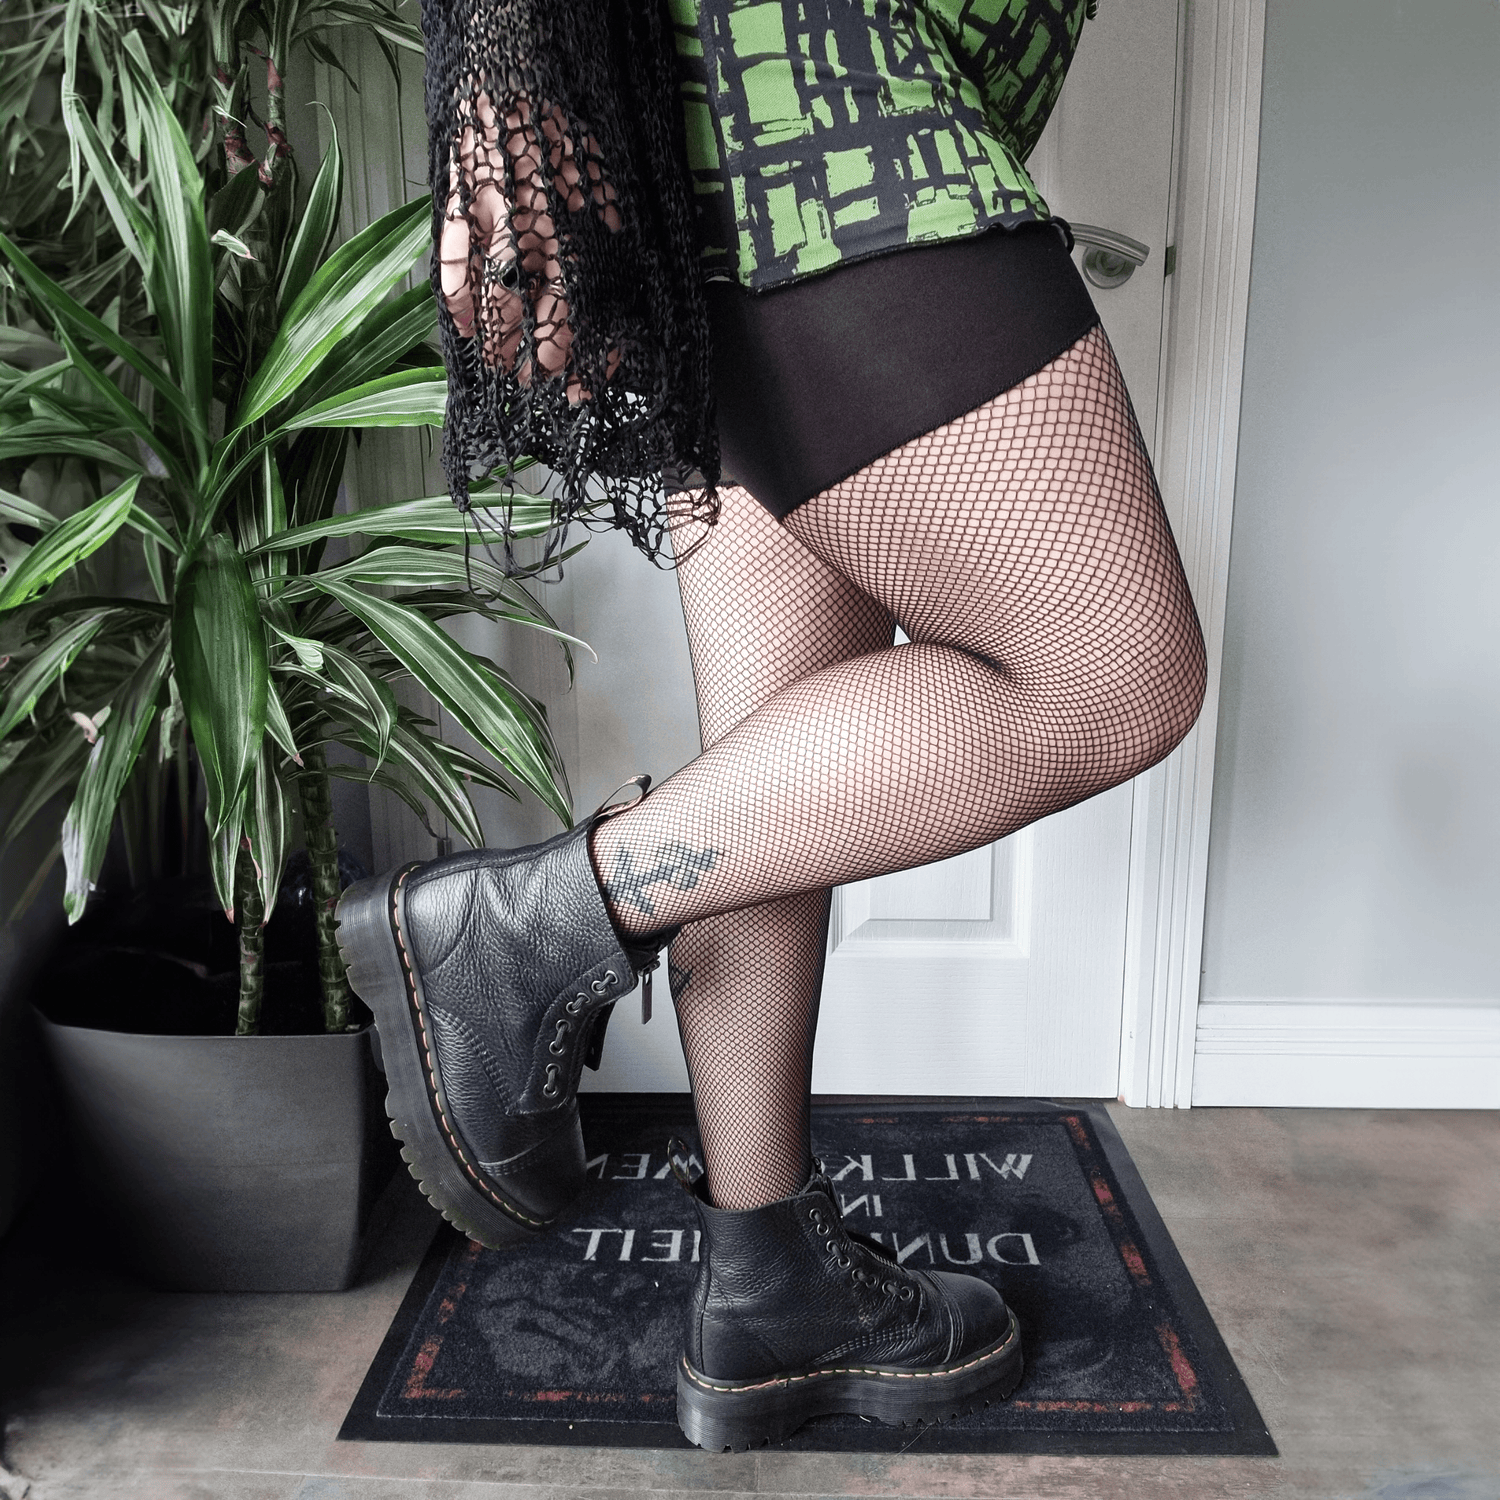 Thighs the Limit Fishnets